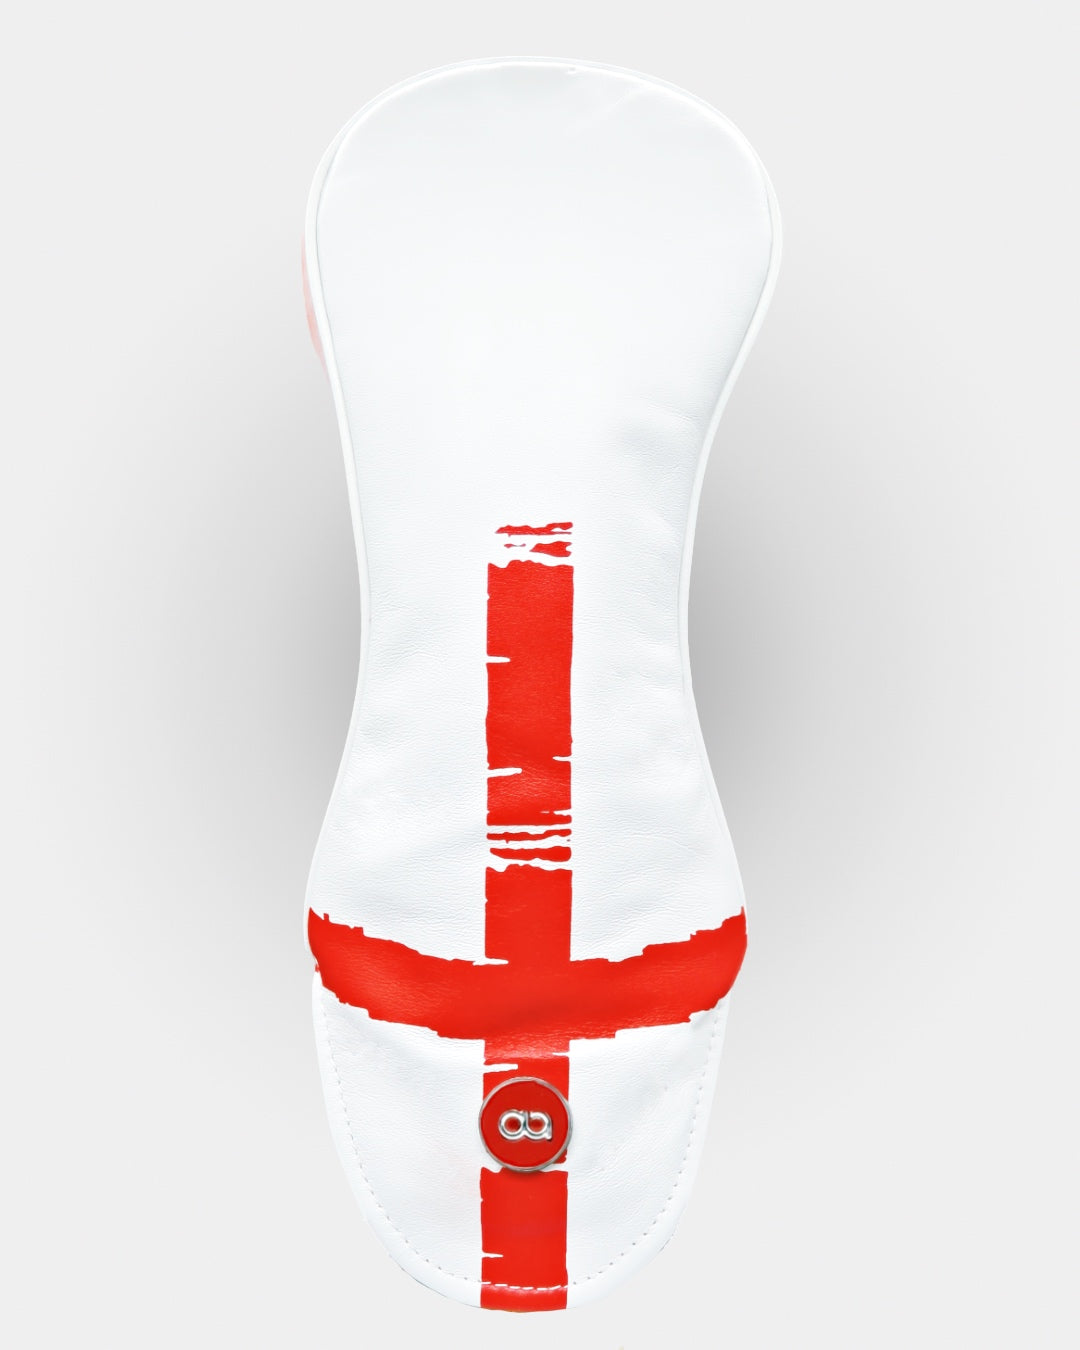 England white and red leather driver headcover by David Alexander